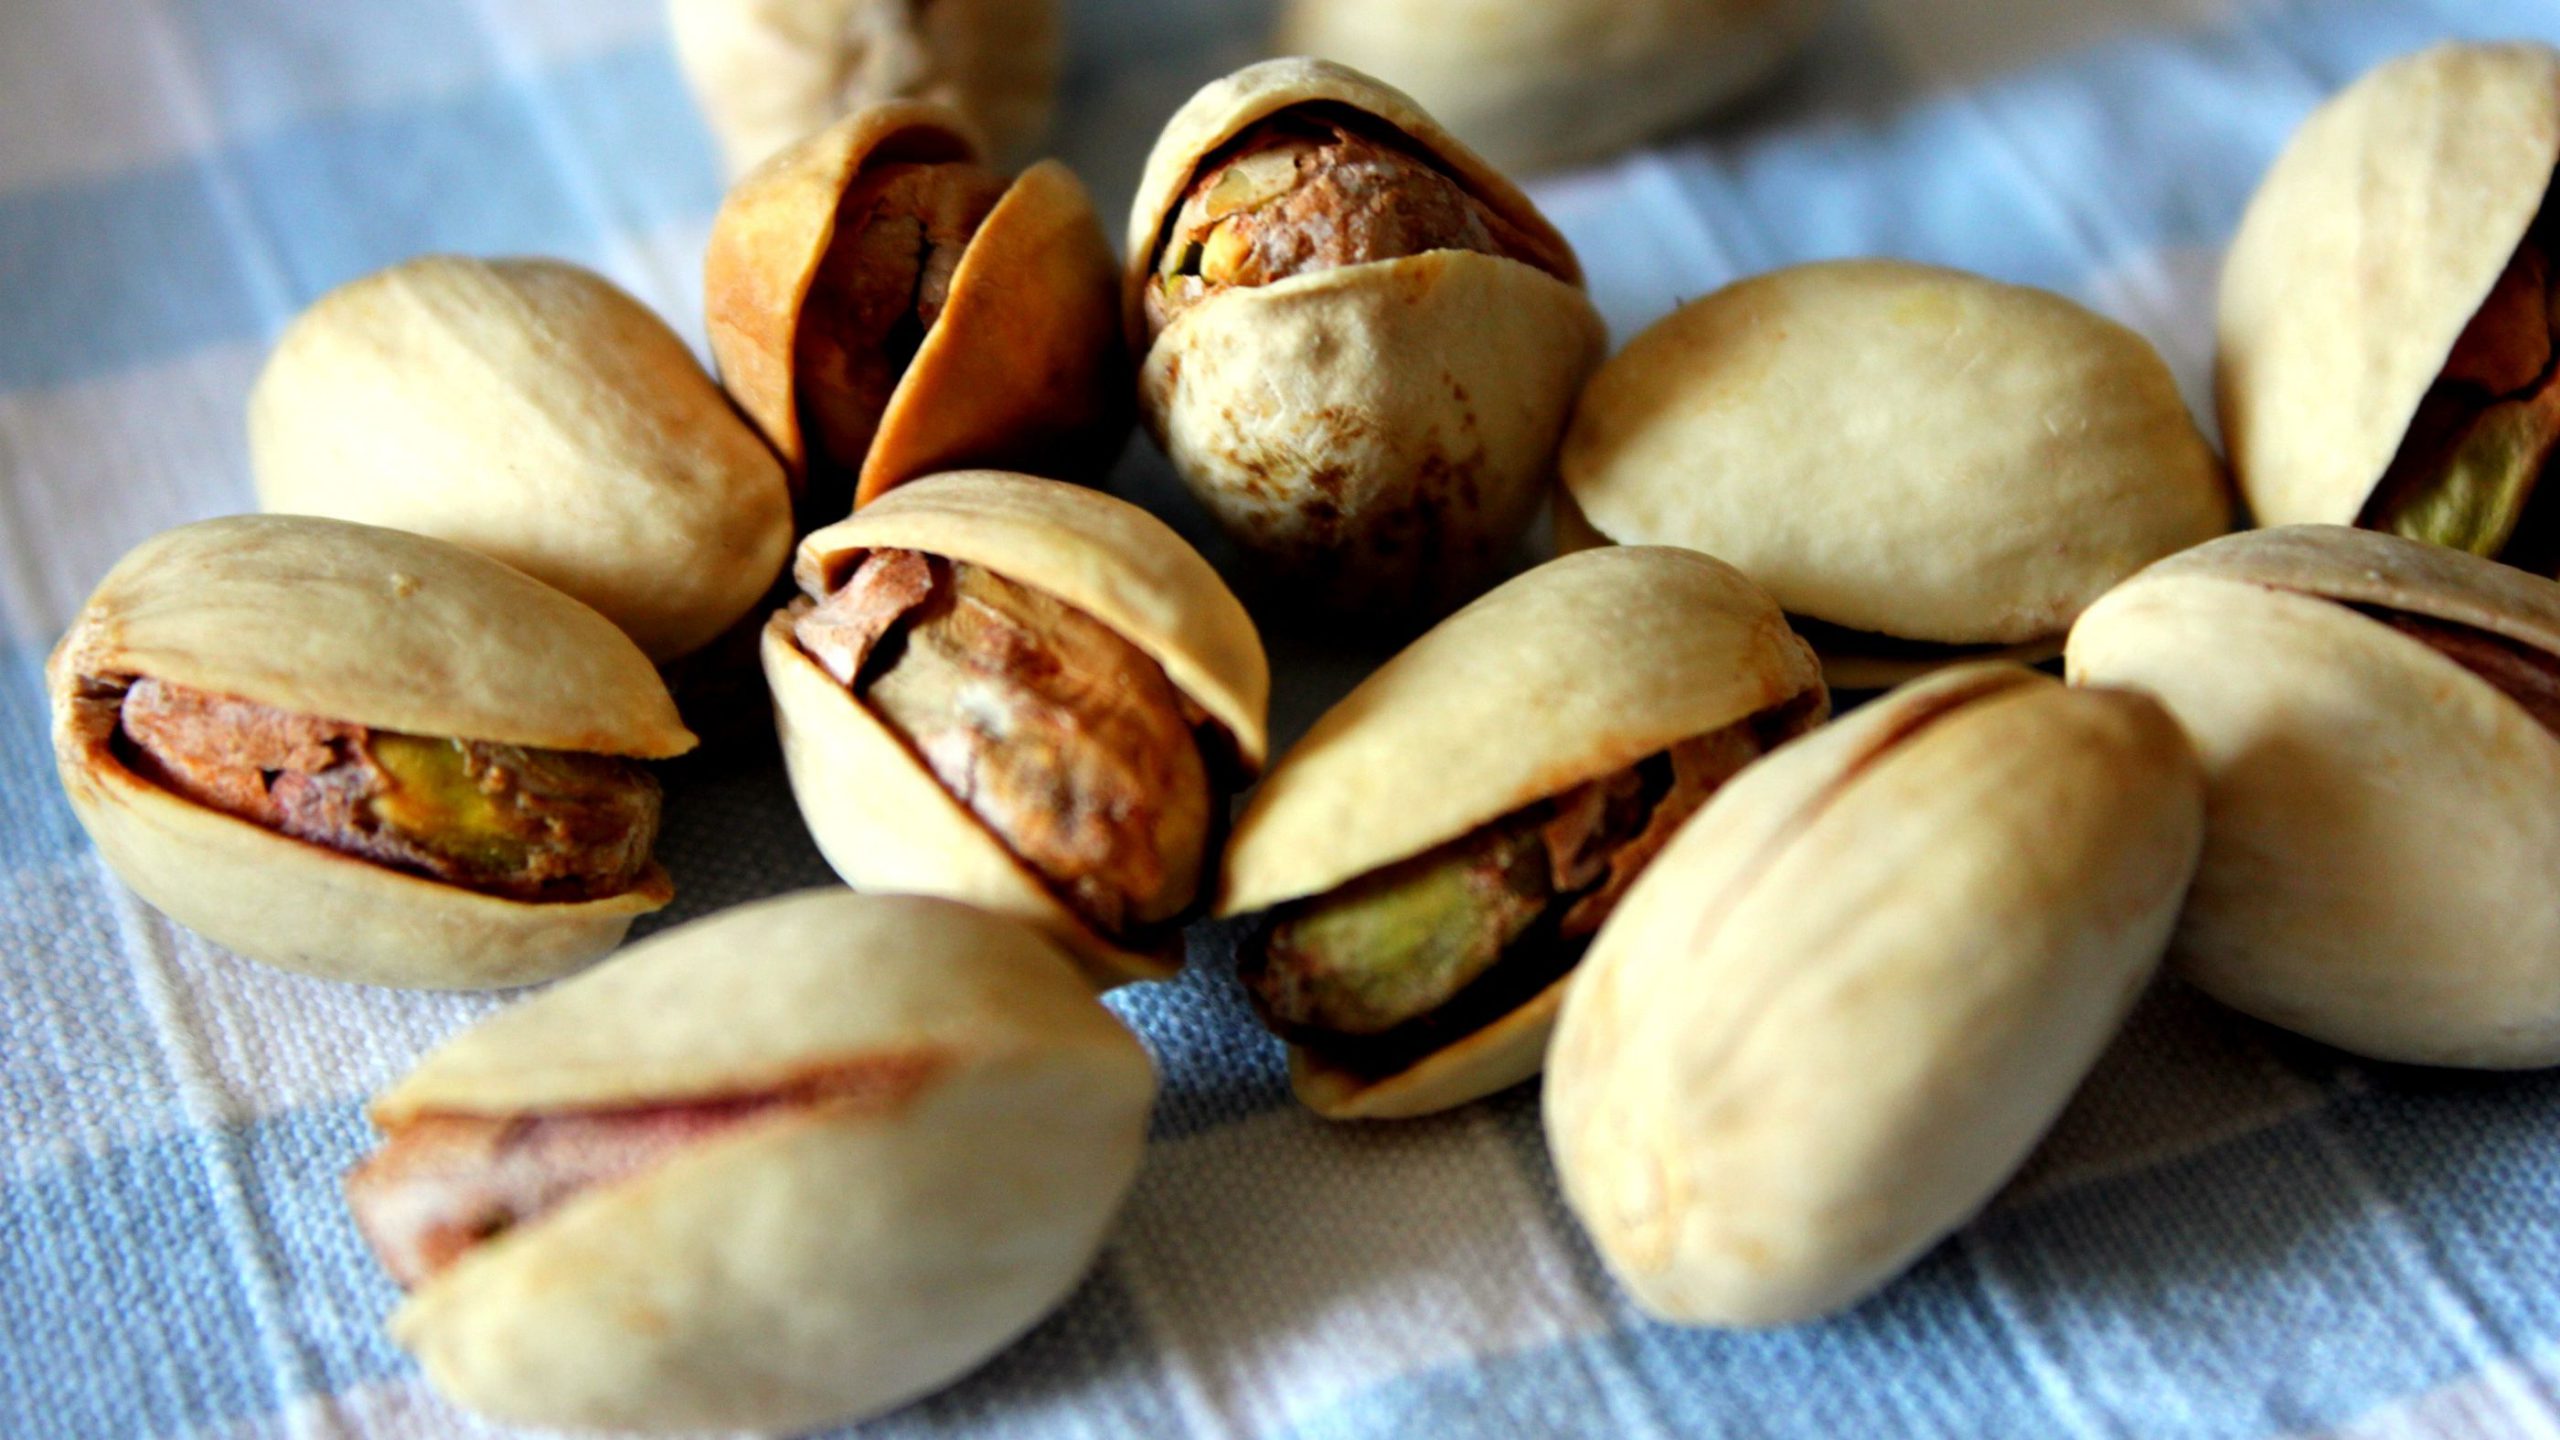 Major export of smiling pistachios to Malaysia